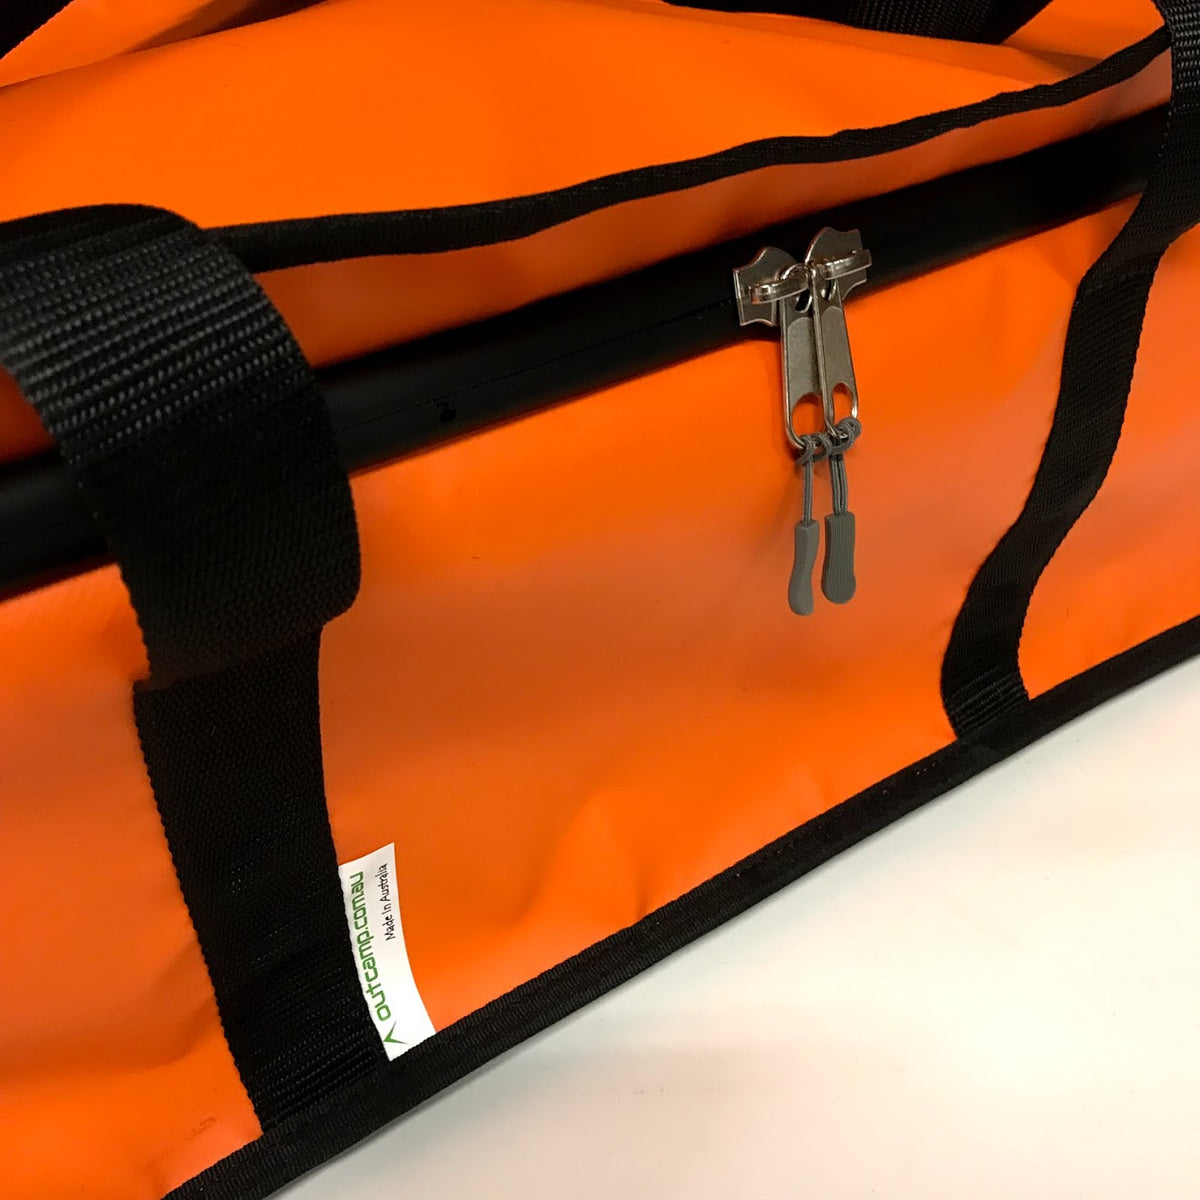 Padded bag for stihl chainsaw